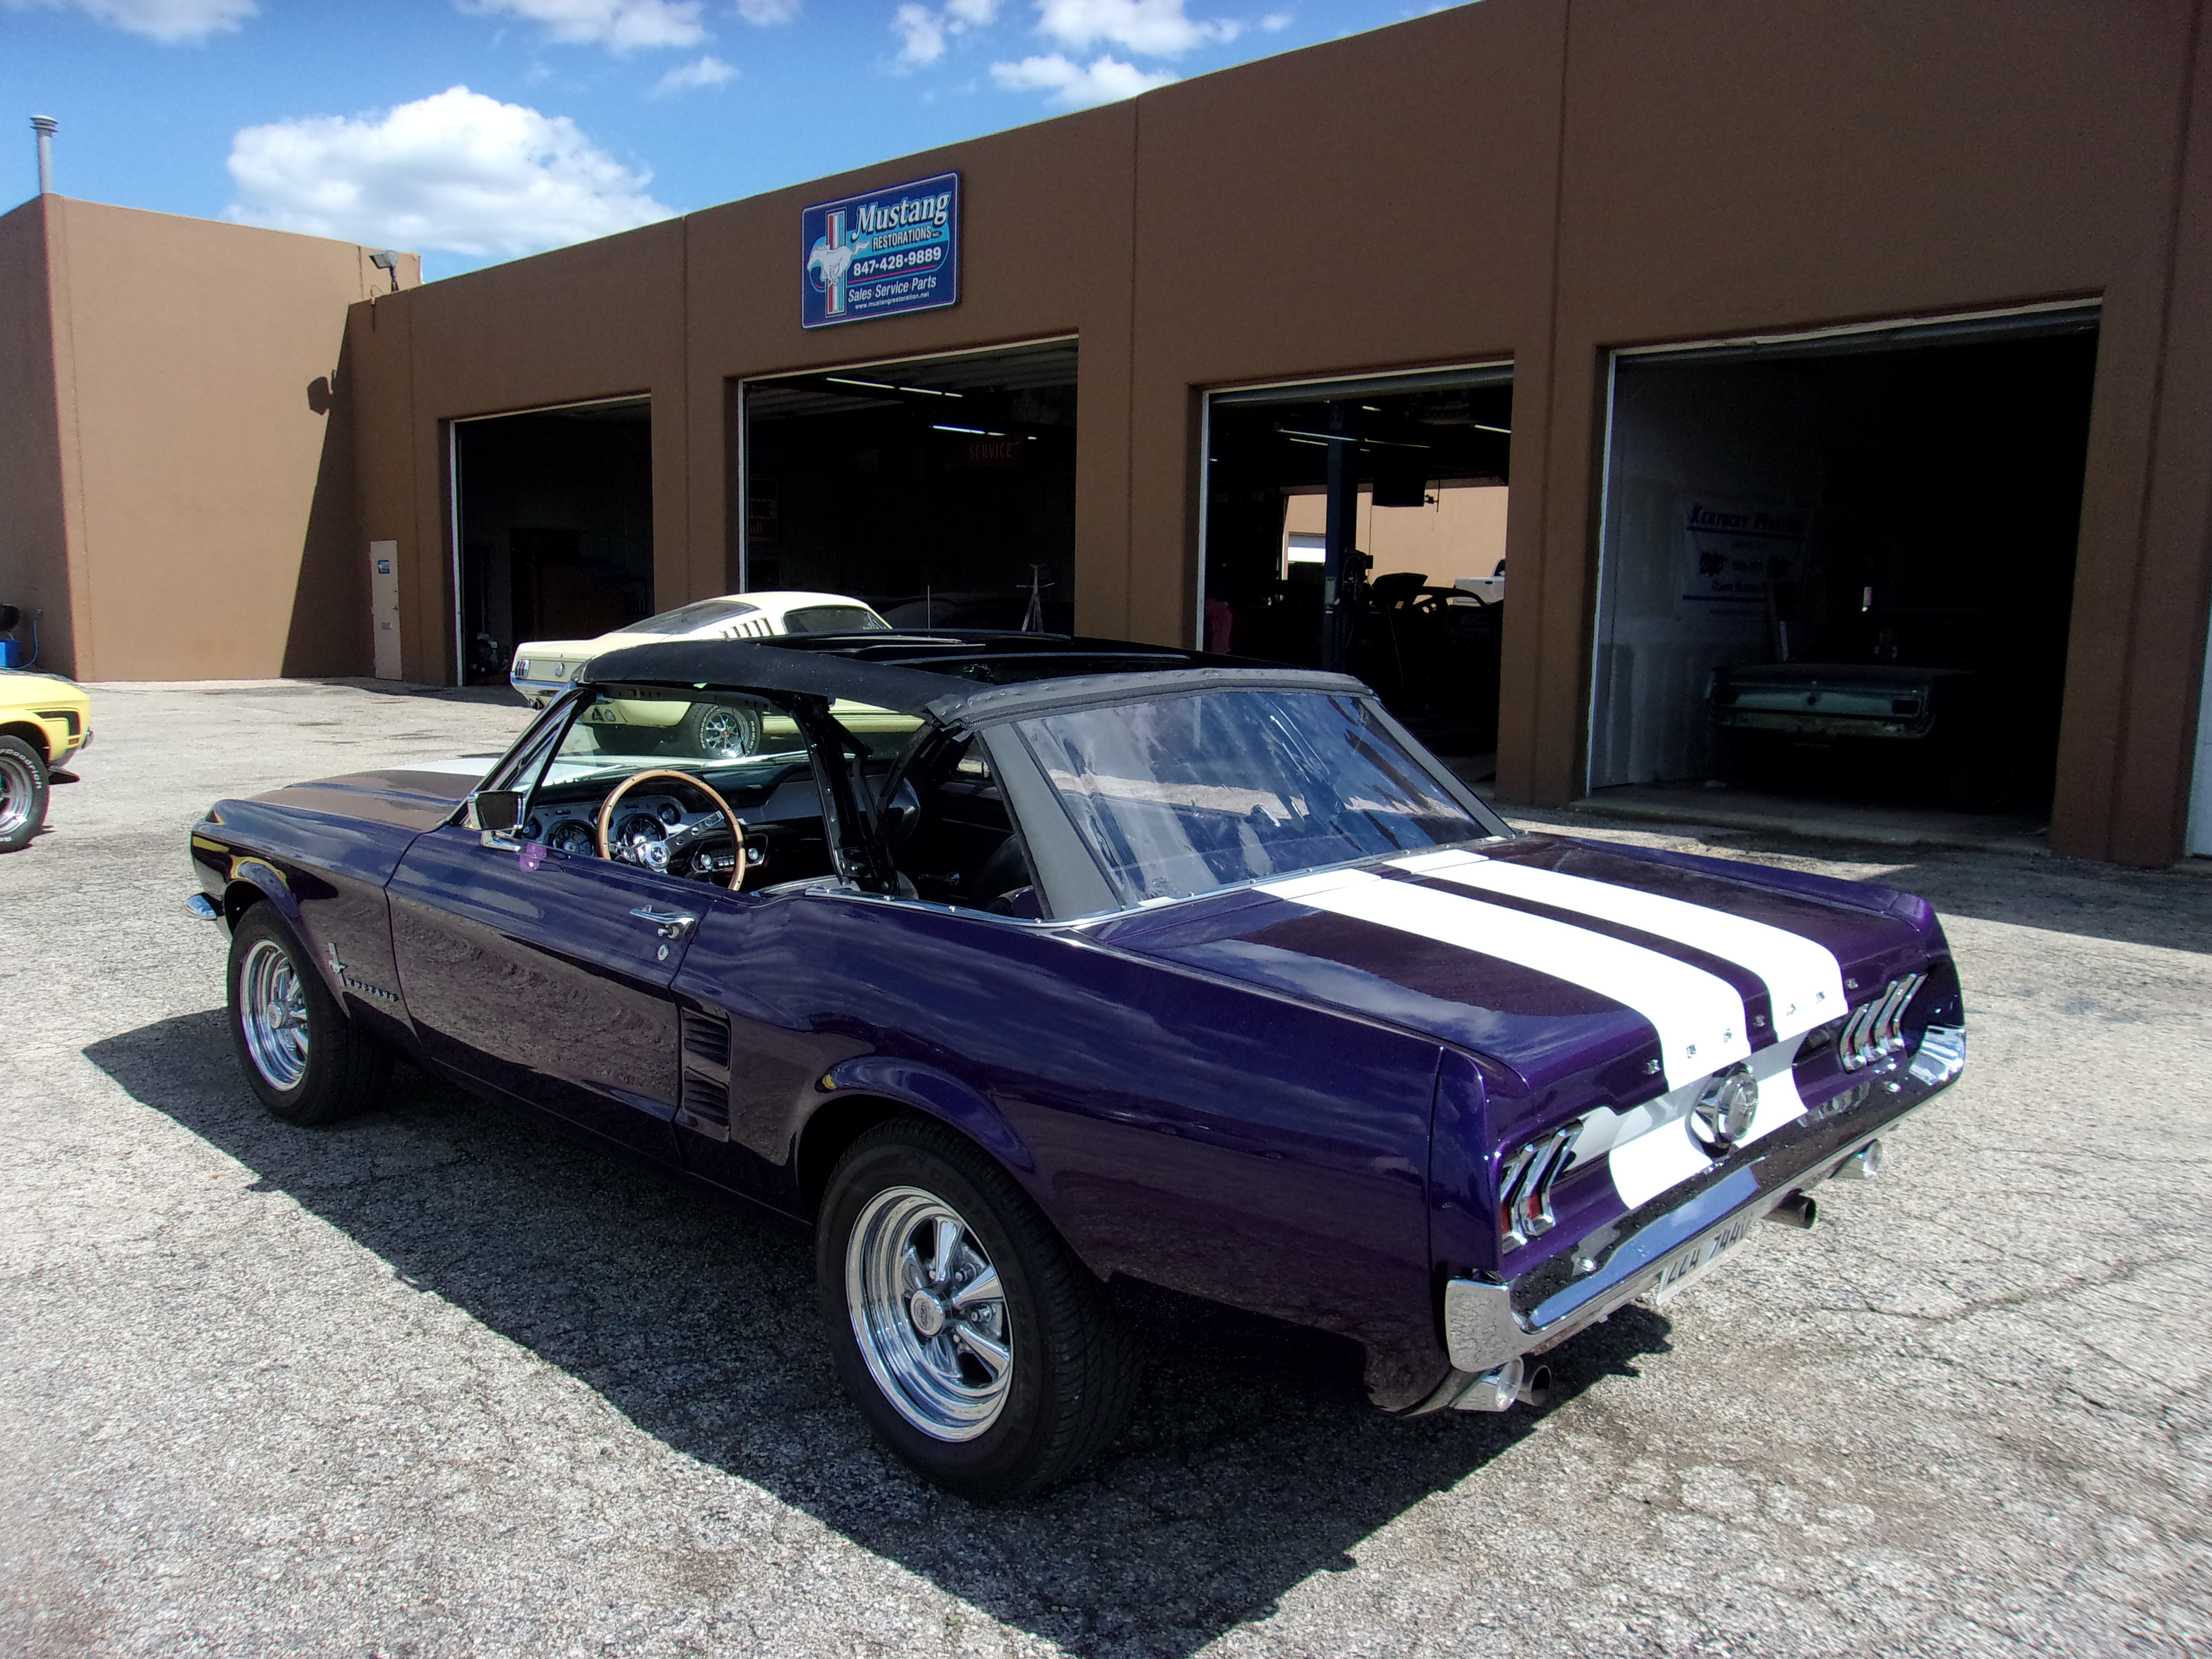 Vintage Ford Mustang Convertible Tops — Mustang Restorations, Inc.  specialize in rotisserie frame-off restorations, rust repair, body work,  paint, engine building & rebuilding, transmission rebuilding, fuels systems  & electrical systems for vintage